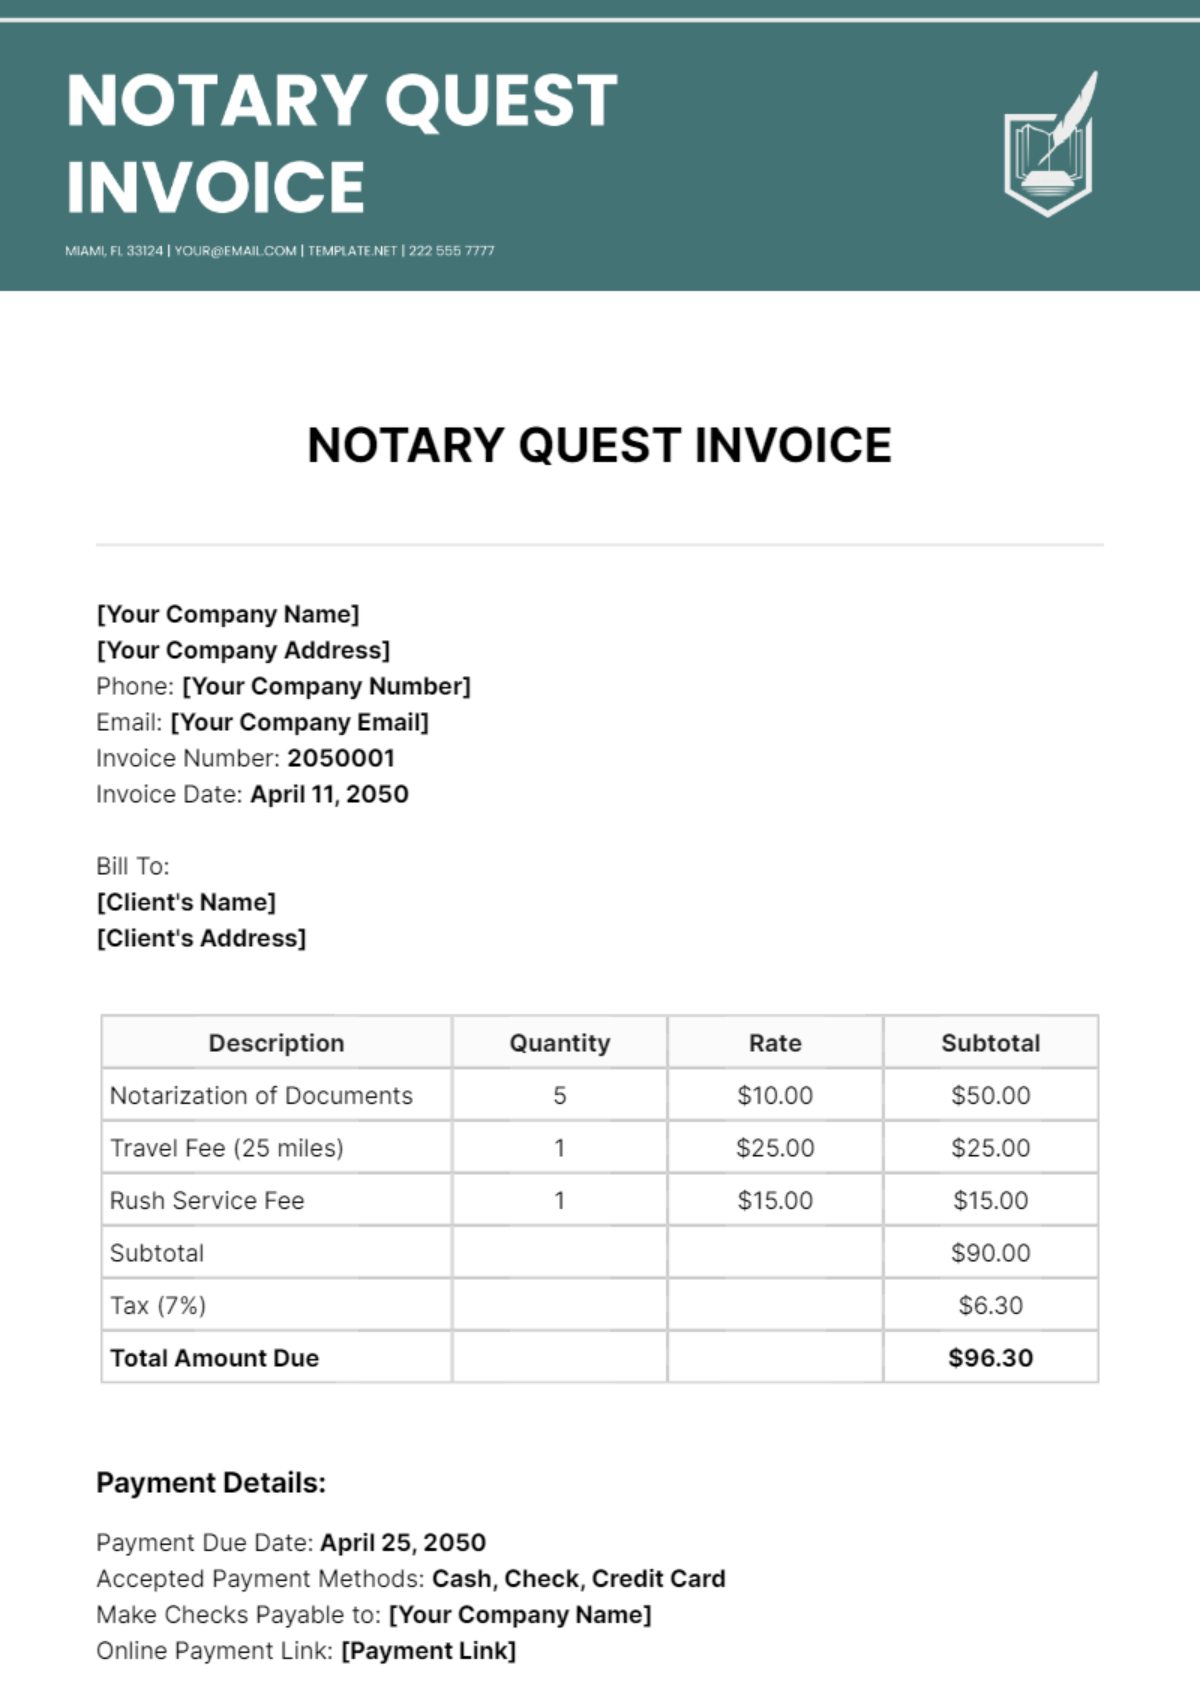 Notary Quest Invoice Template